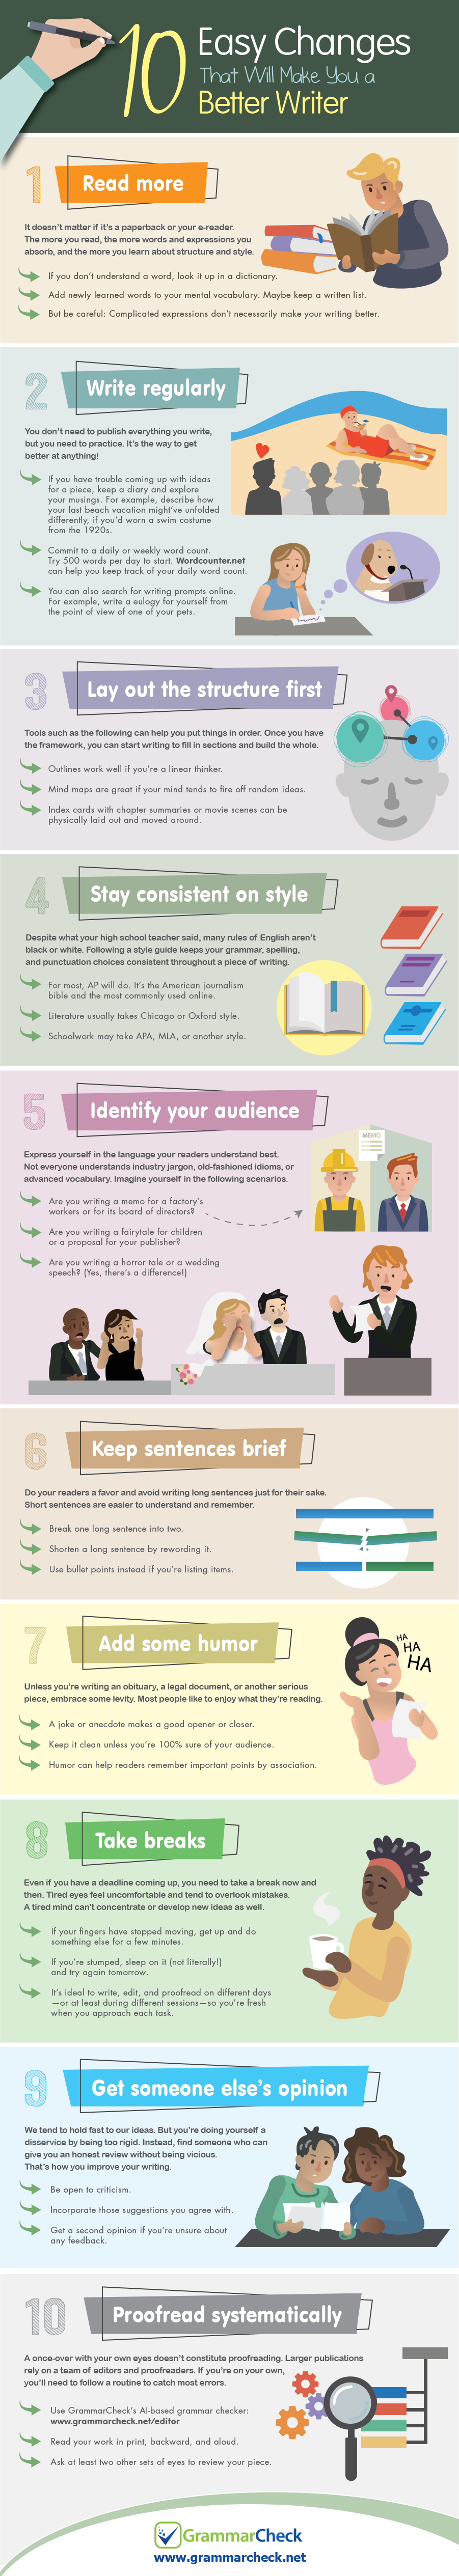 10 Easy Changes That Will Make You a Better Writer (Infographic)